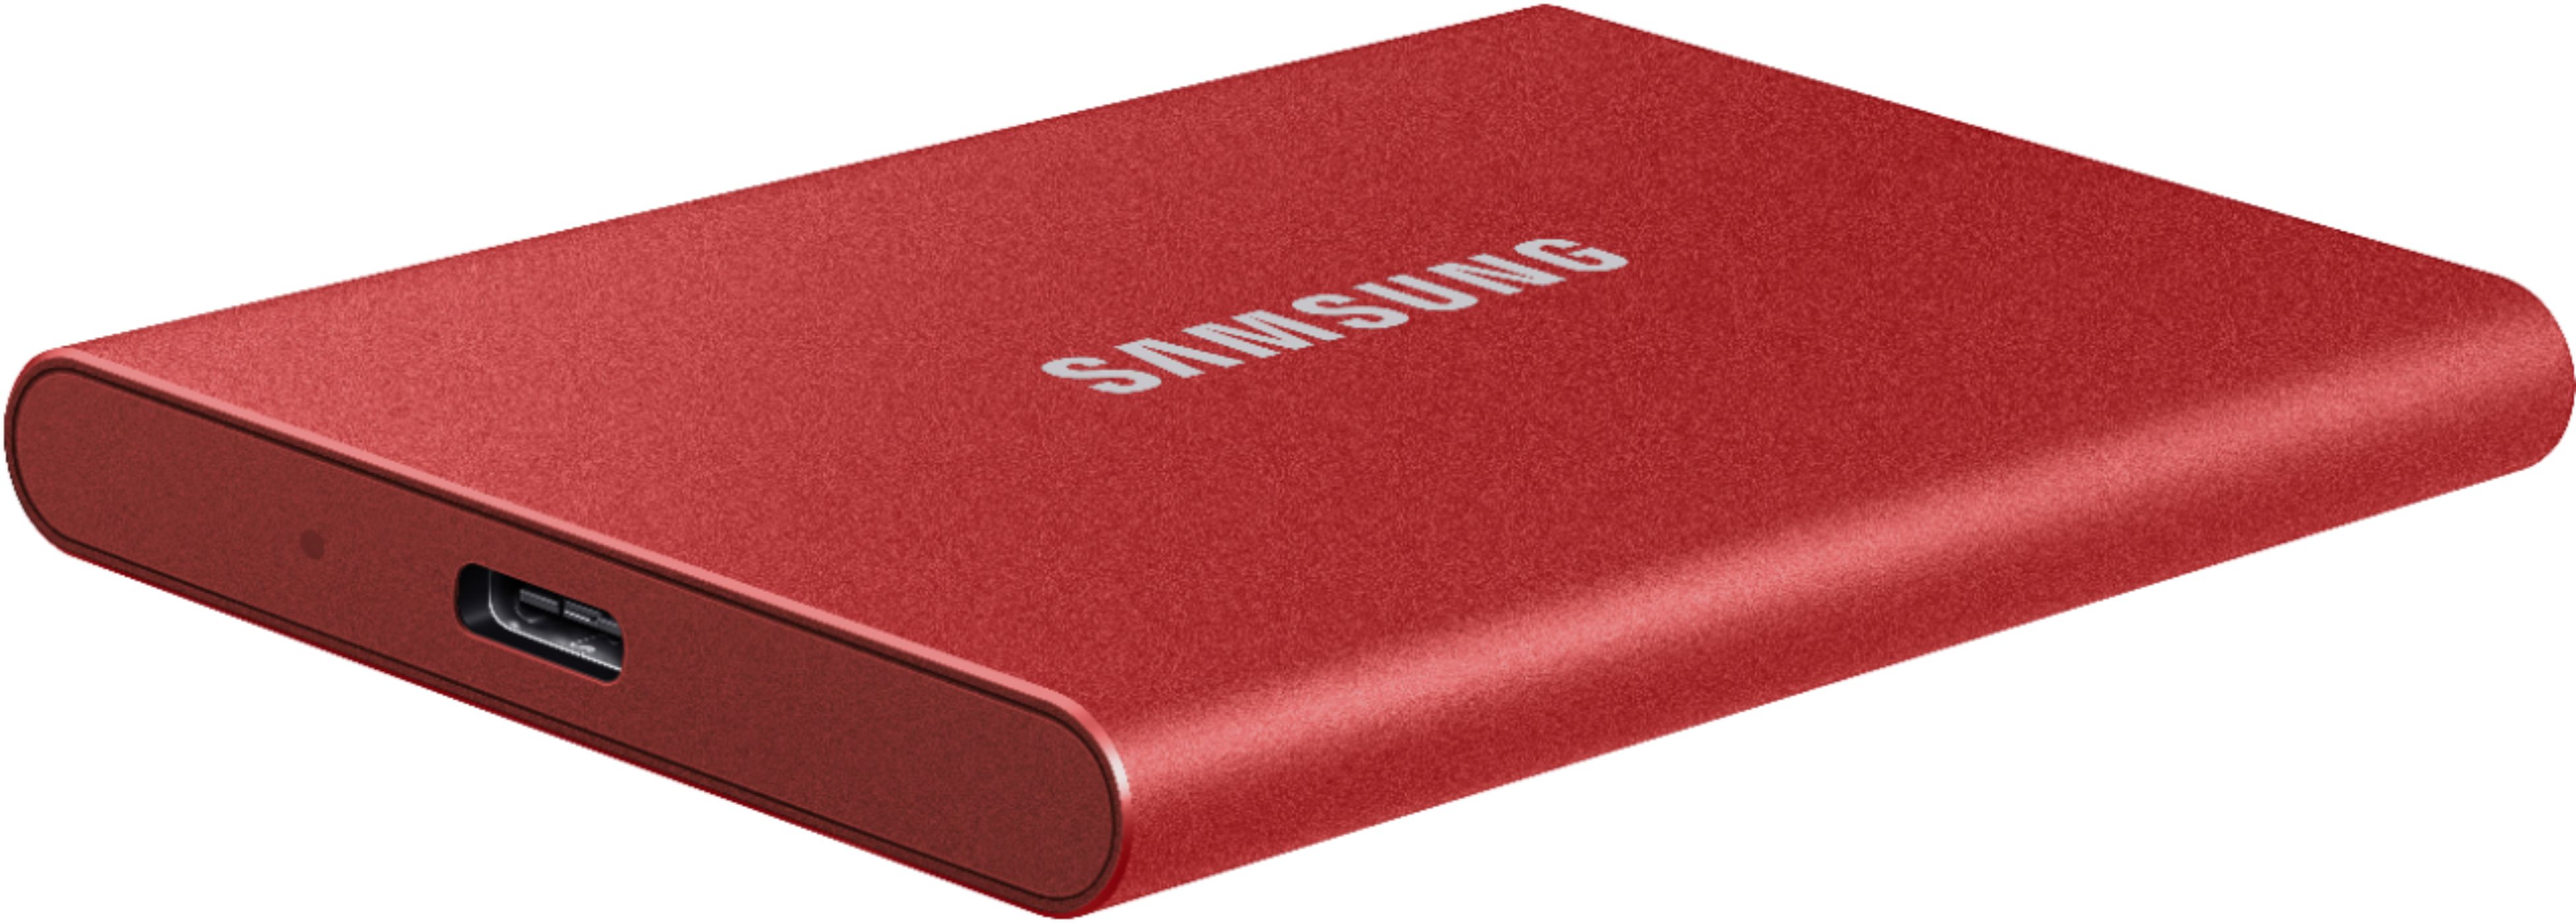 Samsung Portable SSD T7 2to 